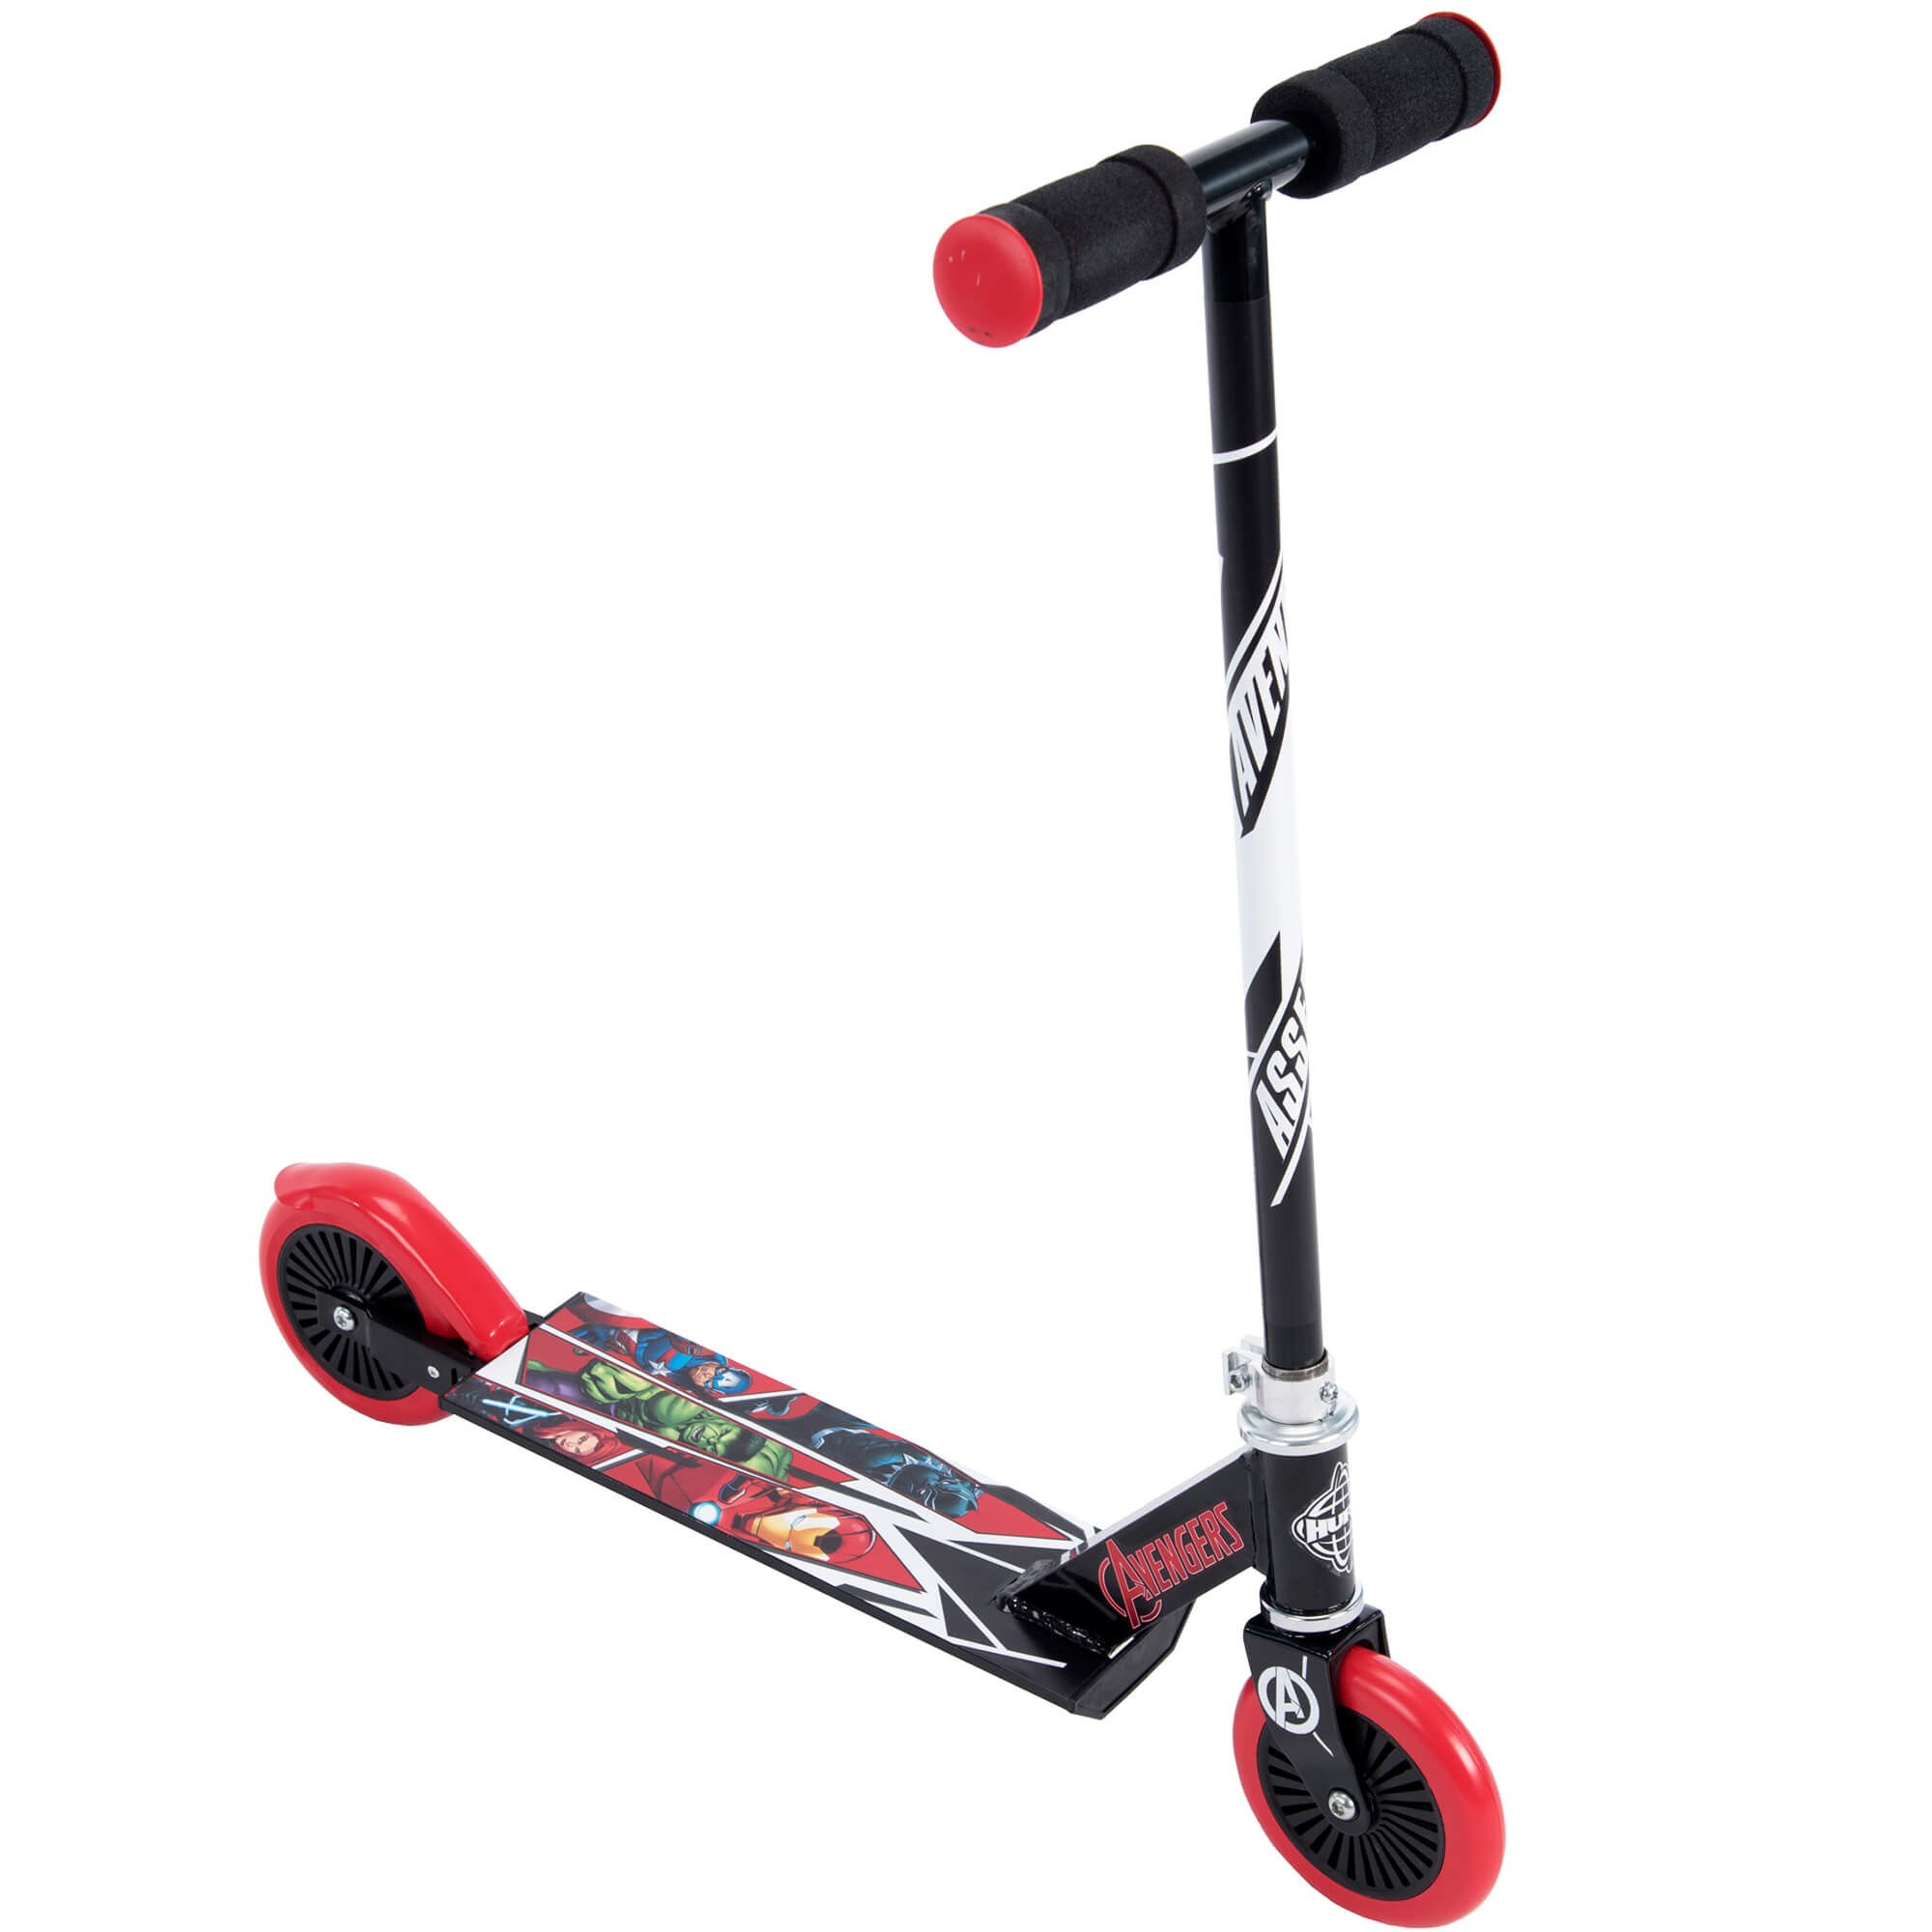 Marvel avengers Inline Folding Kick Scooter for Kids by Huffy - image 1 of 5